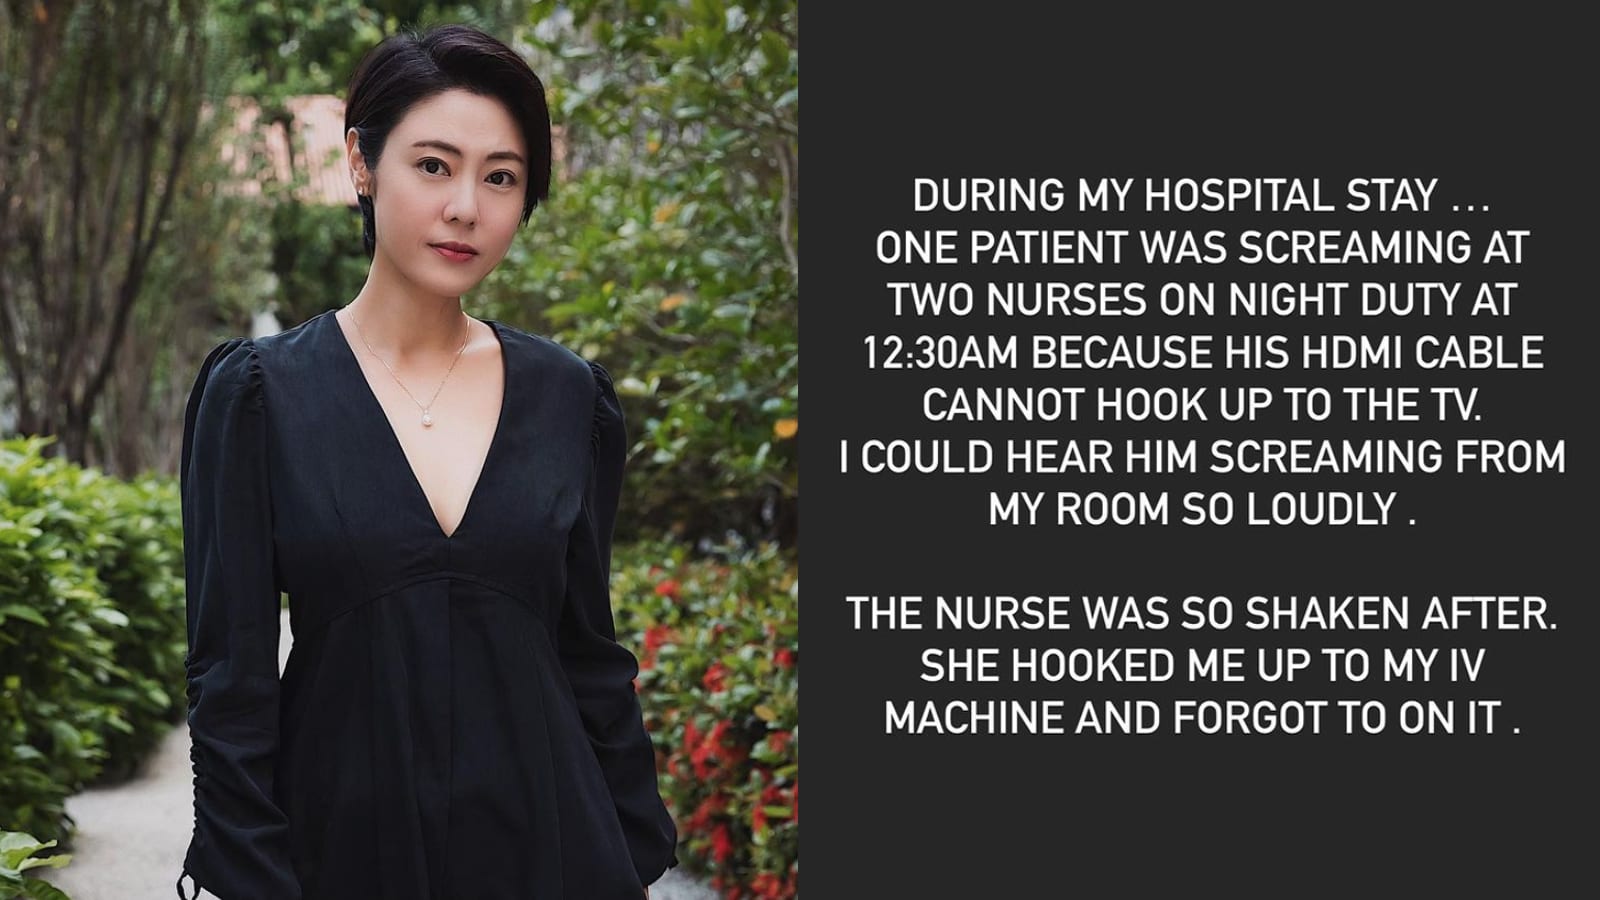 Cynthia Koh Recounts How A Hospital Patient Screamed At Nurses 'Cos He Couldn’t Get The TV To Work